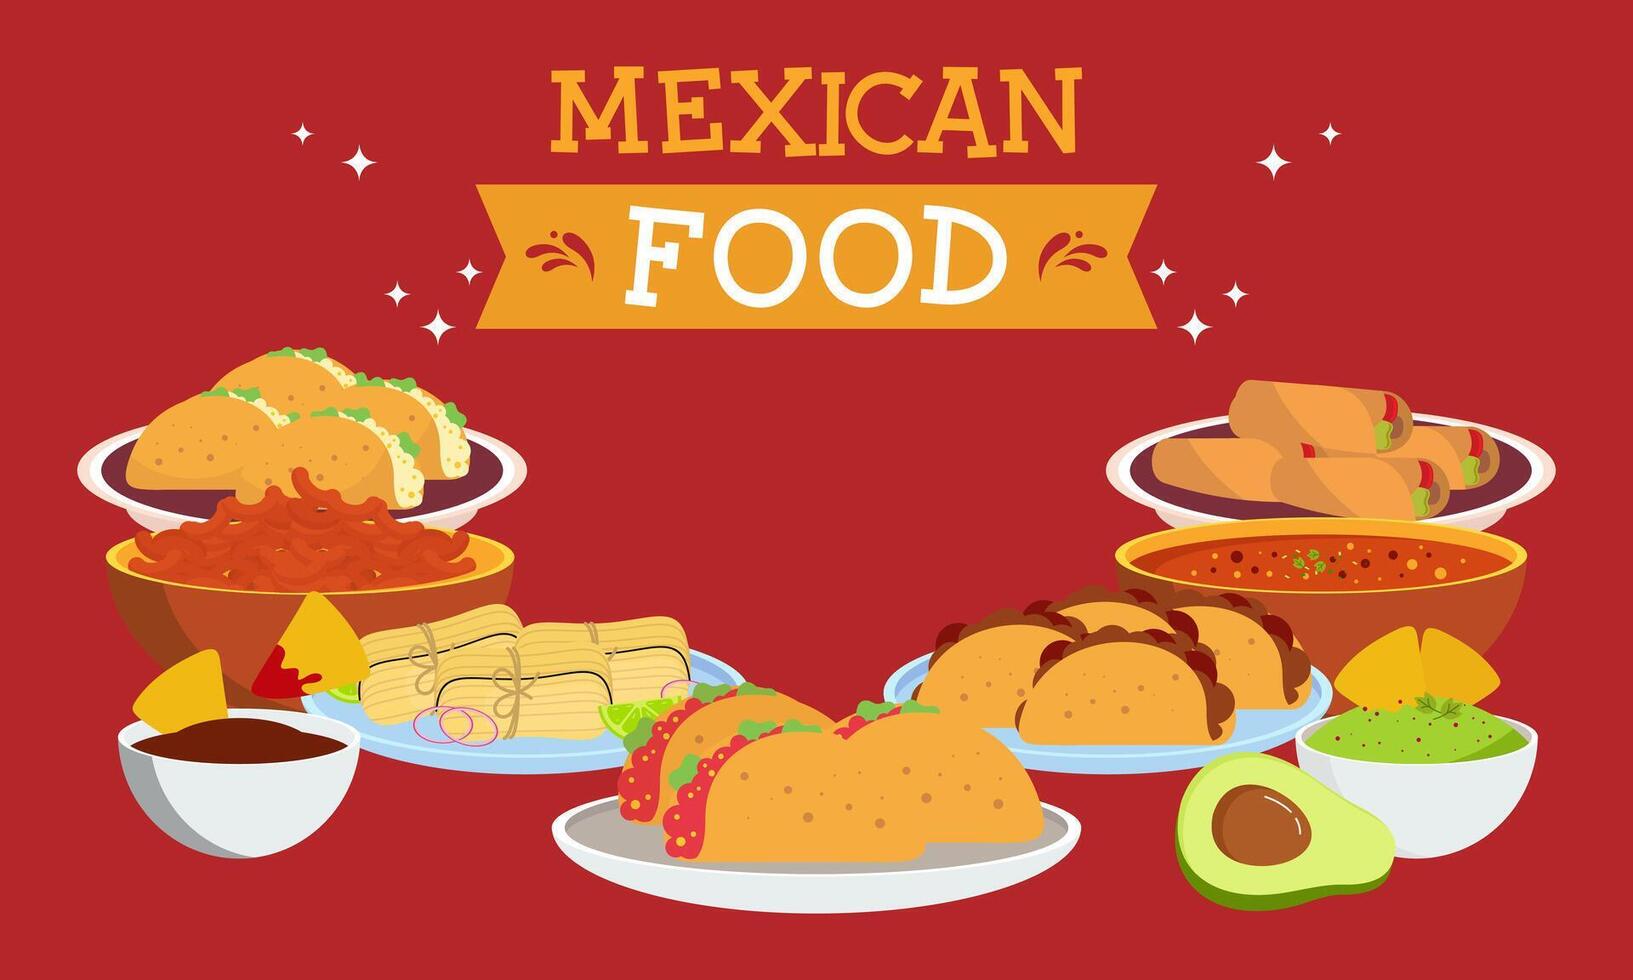 Mexican Food Signature Dishes Illustration vector